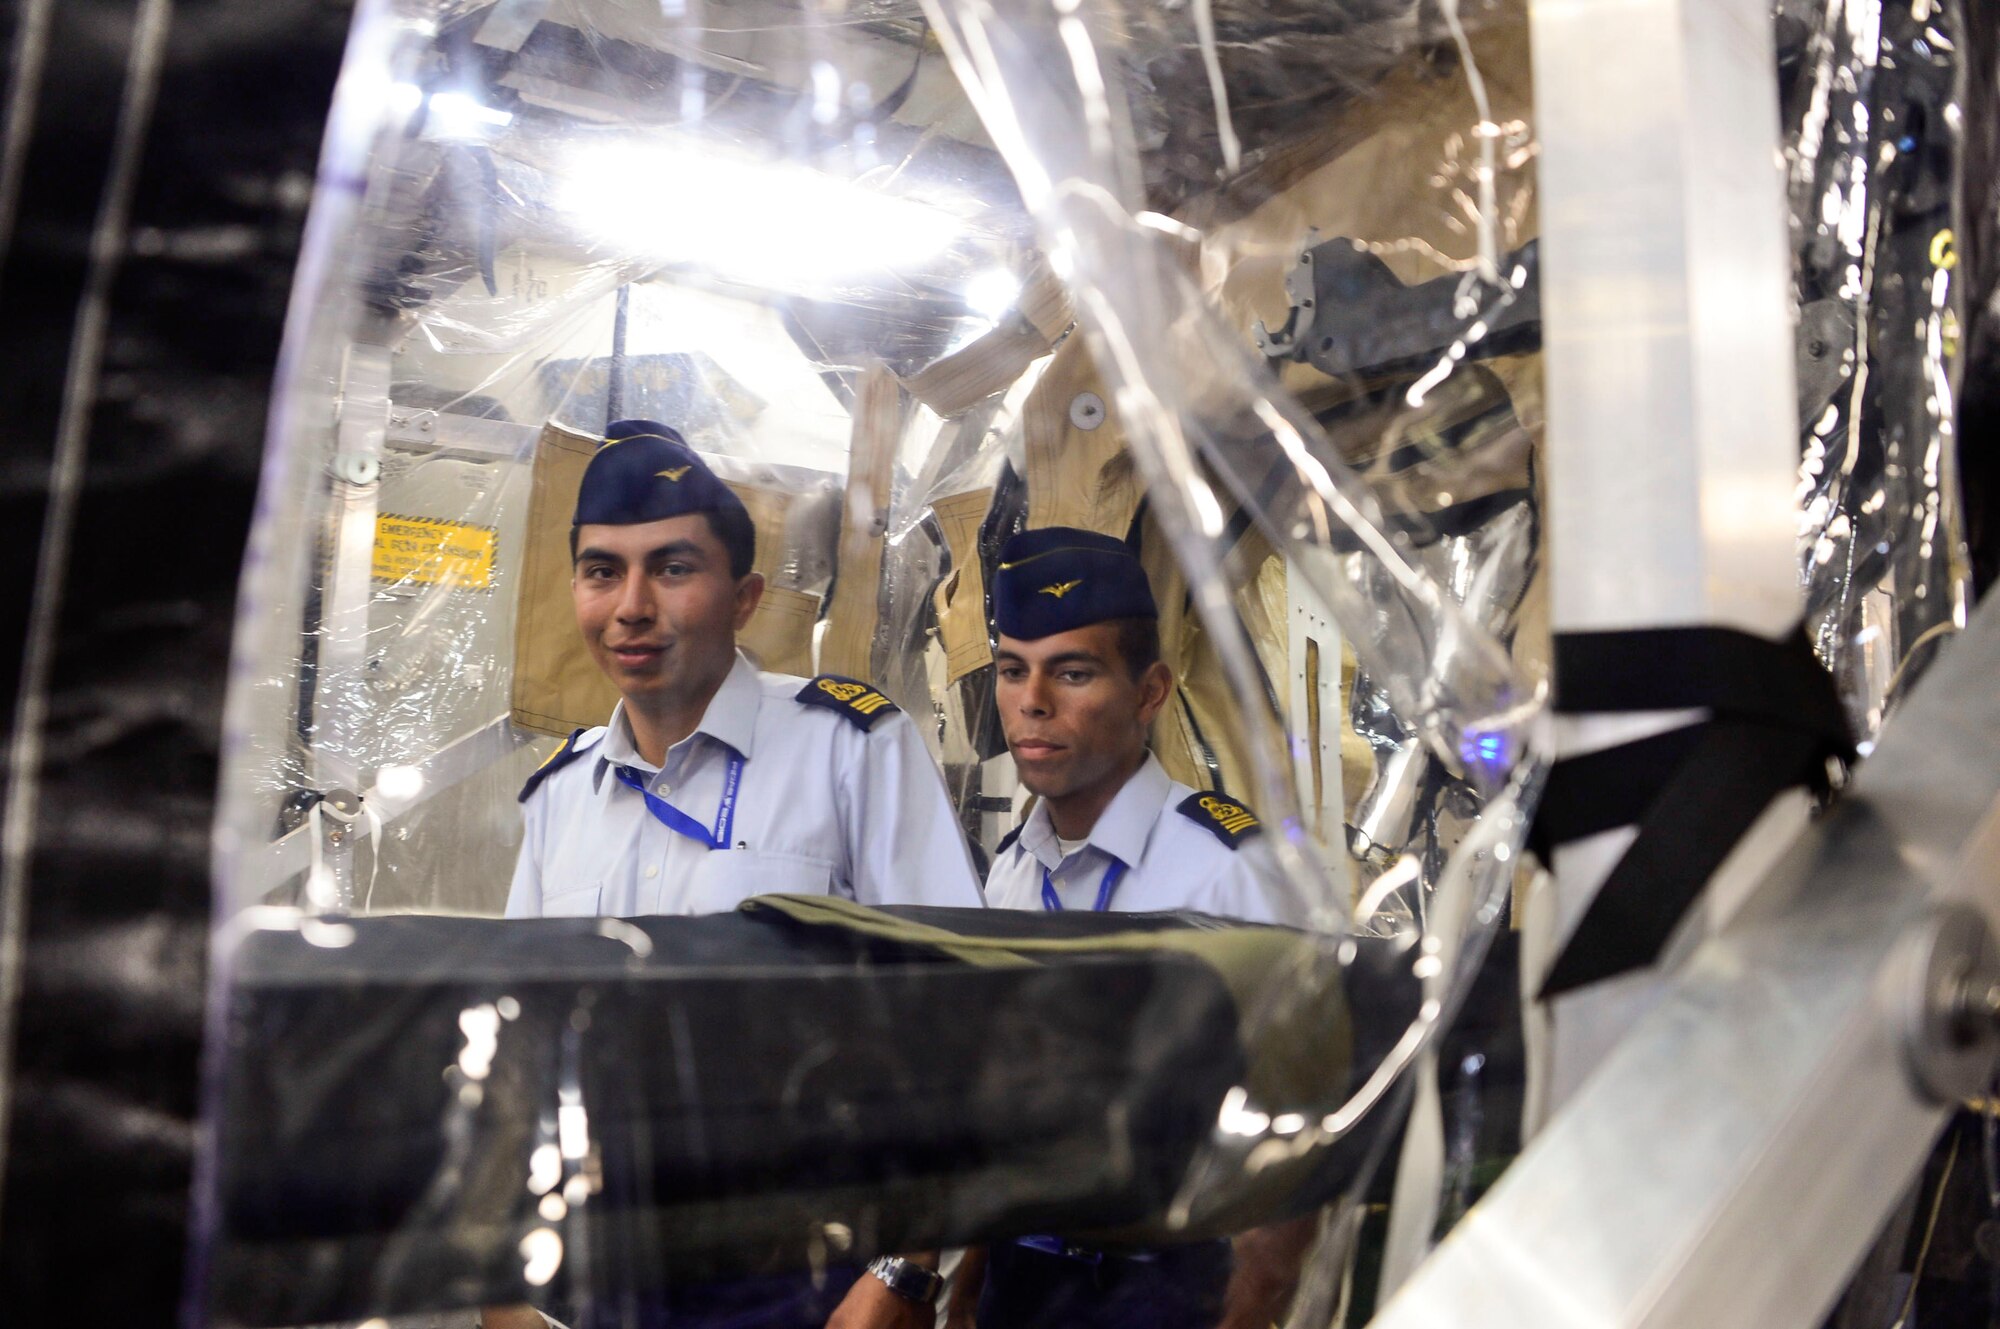 Airmen from the Chilean Air Force take a tour of the Transport Isolation System during the 2016 International Air and Space Fair (FIDAE) in Santiago, Chile, March 30, 2016. Exchanges are conducted regularly throughout the year and involve U.S. Airmen sharing best practices and procedures to build partnerships and promote interoperability with partner-nation air forces throughout South America, Central America and the Caribbean.  (U.S. Air Force photo by Tech. Sgt. Heather Redman/Released)